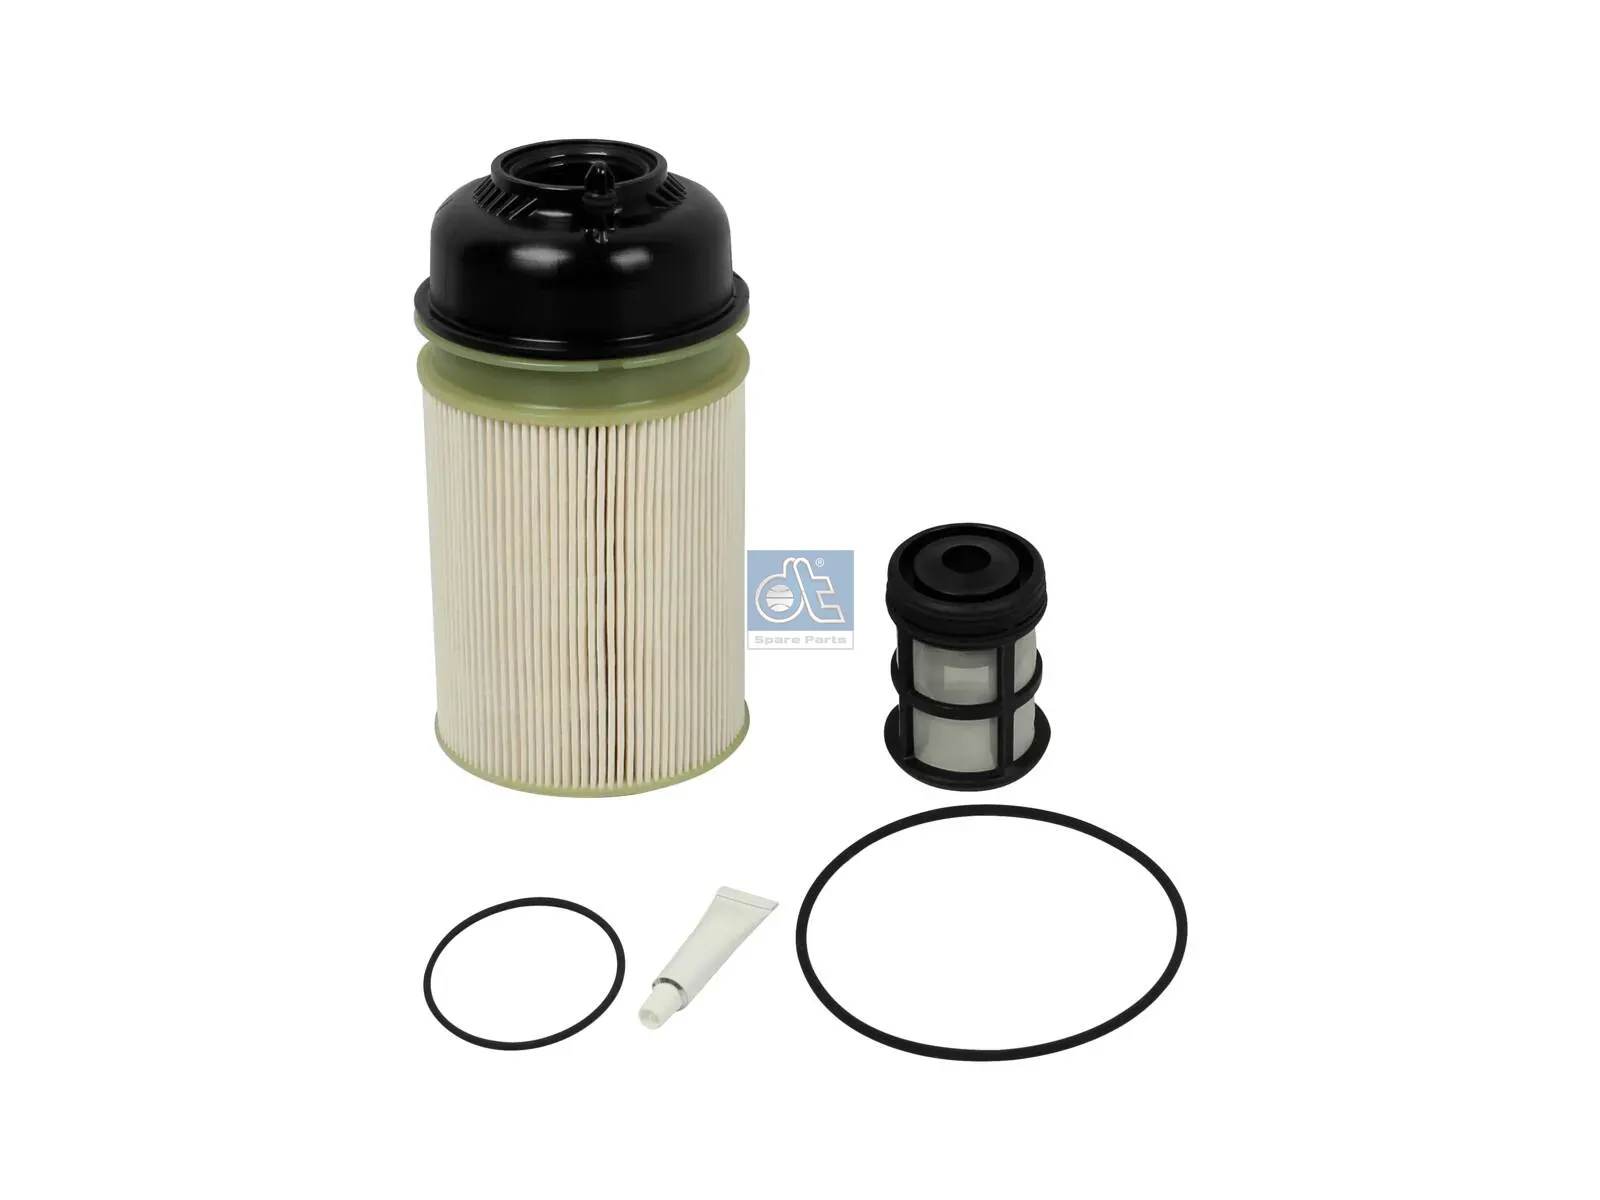 Fuel filter insert, with prefilter